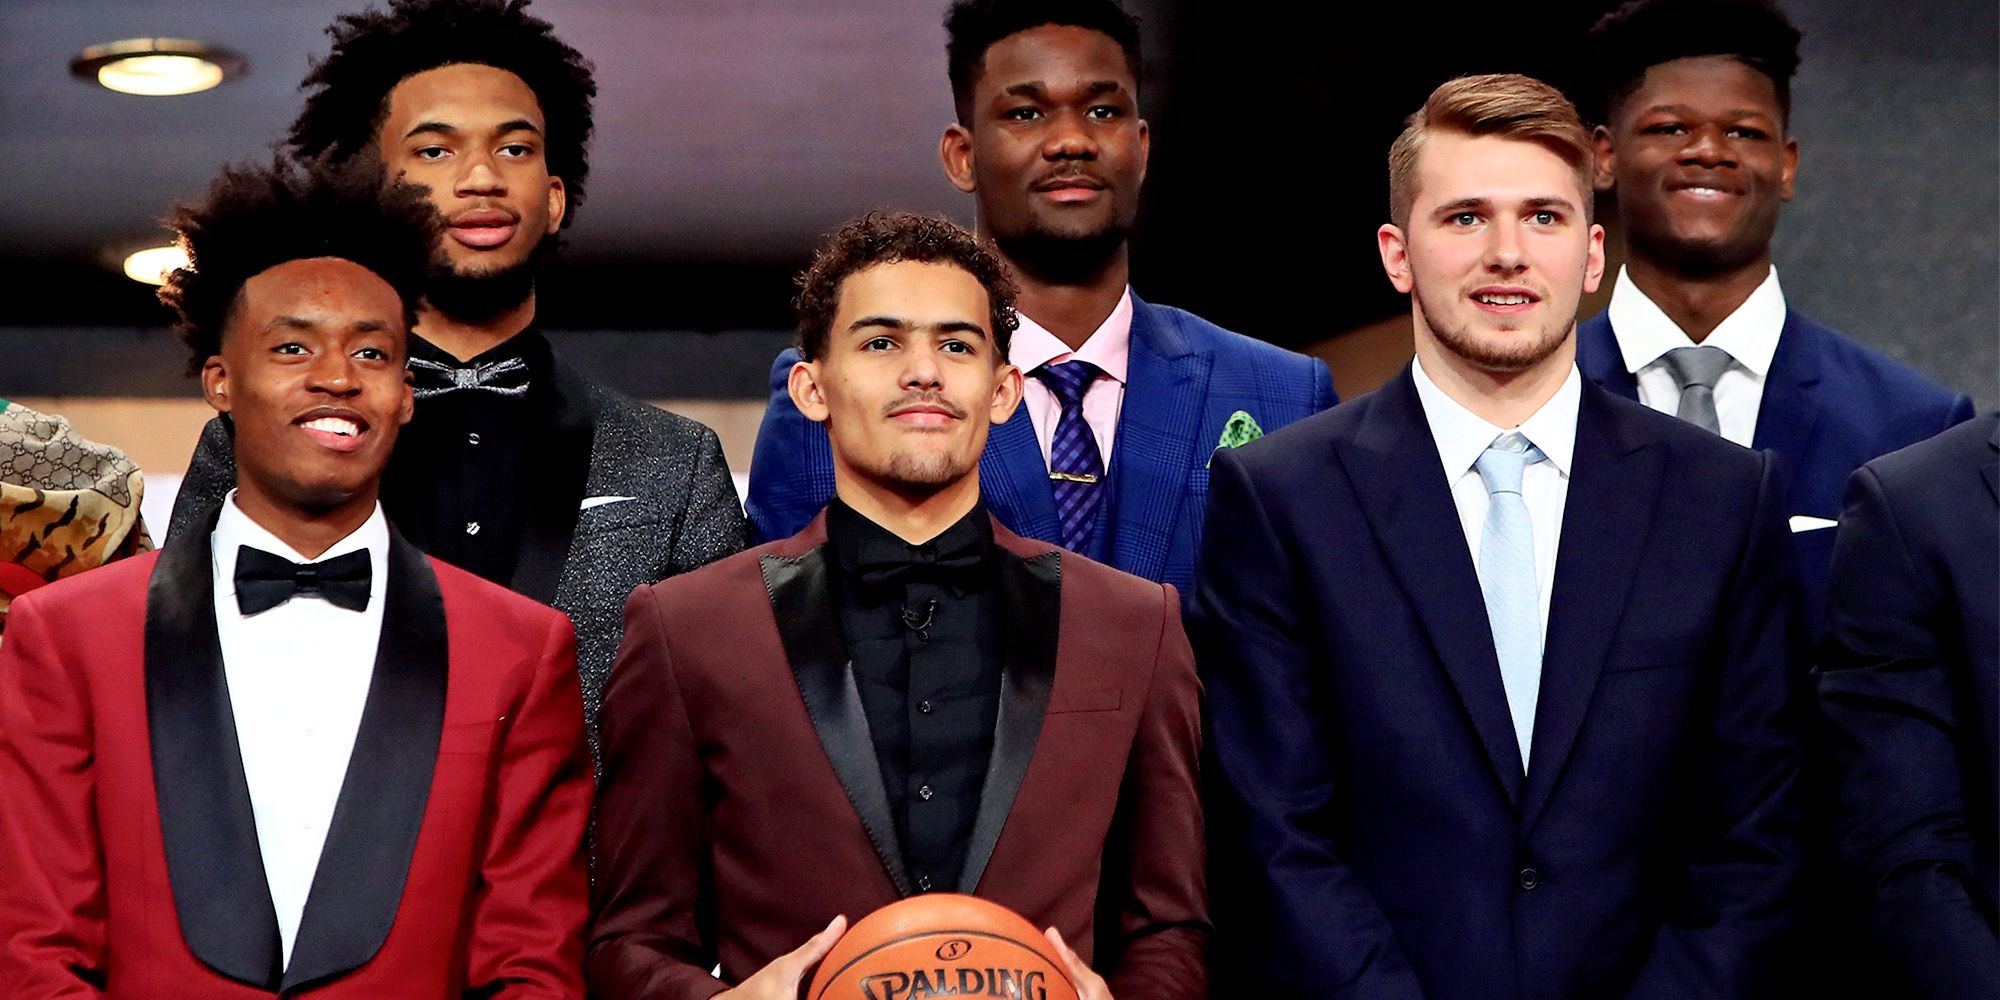 The Best Looks From The Nba Draft Green Carpet